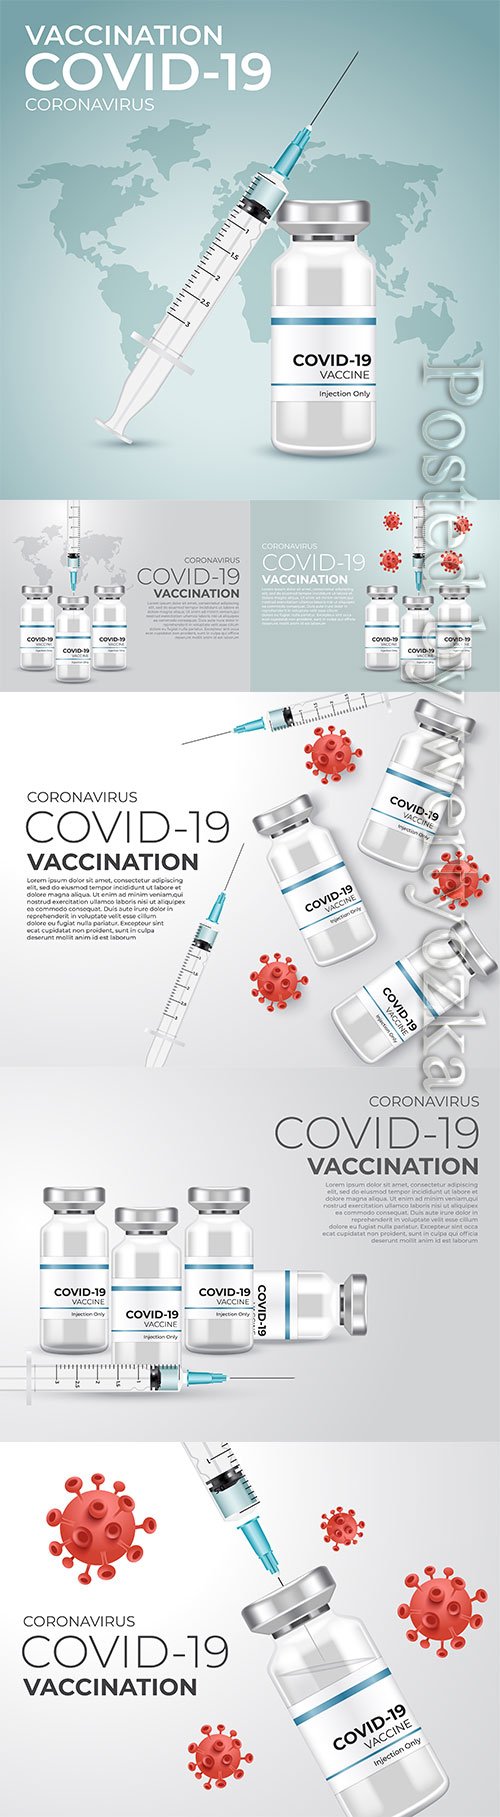 Covid 19 corona virus vaccination with vaccine bottle and syringe injection